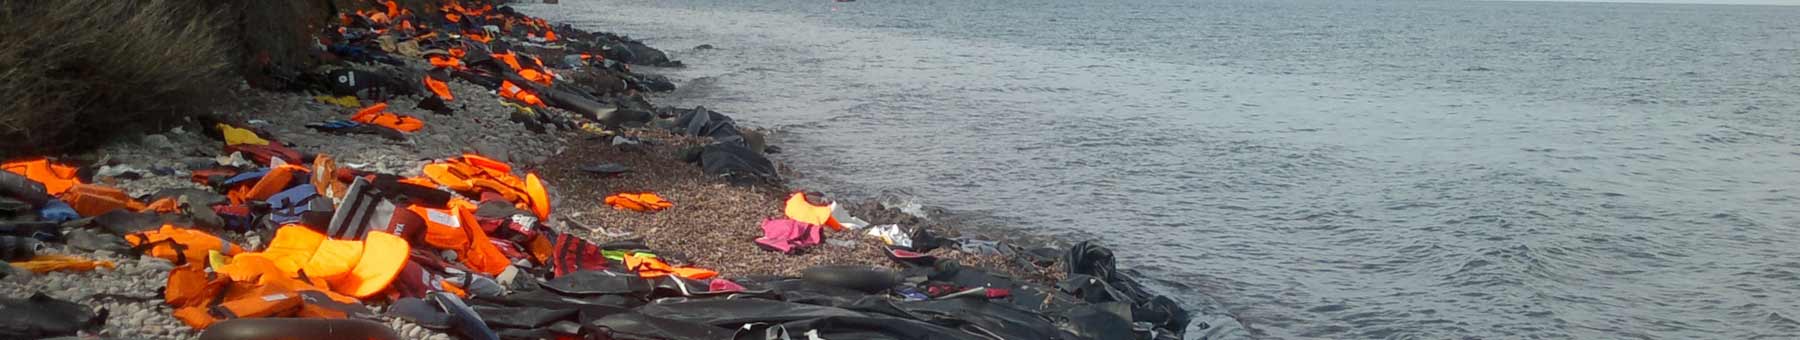 Life jackets discarded on the beach at Lesbos, Greece.